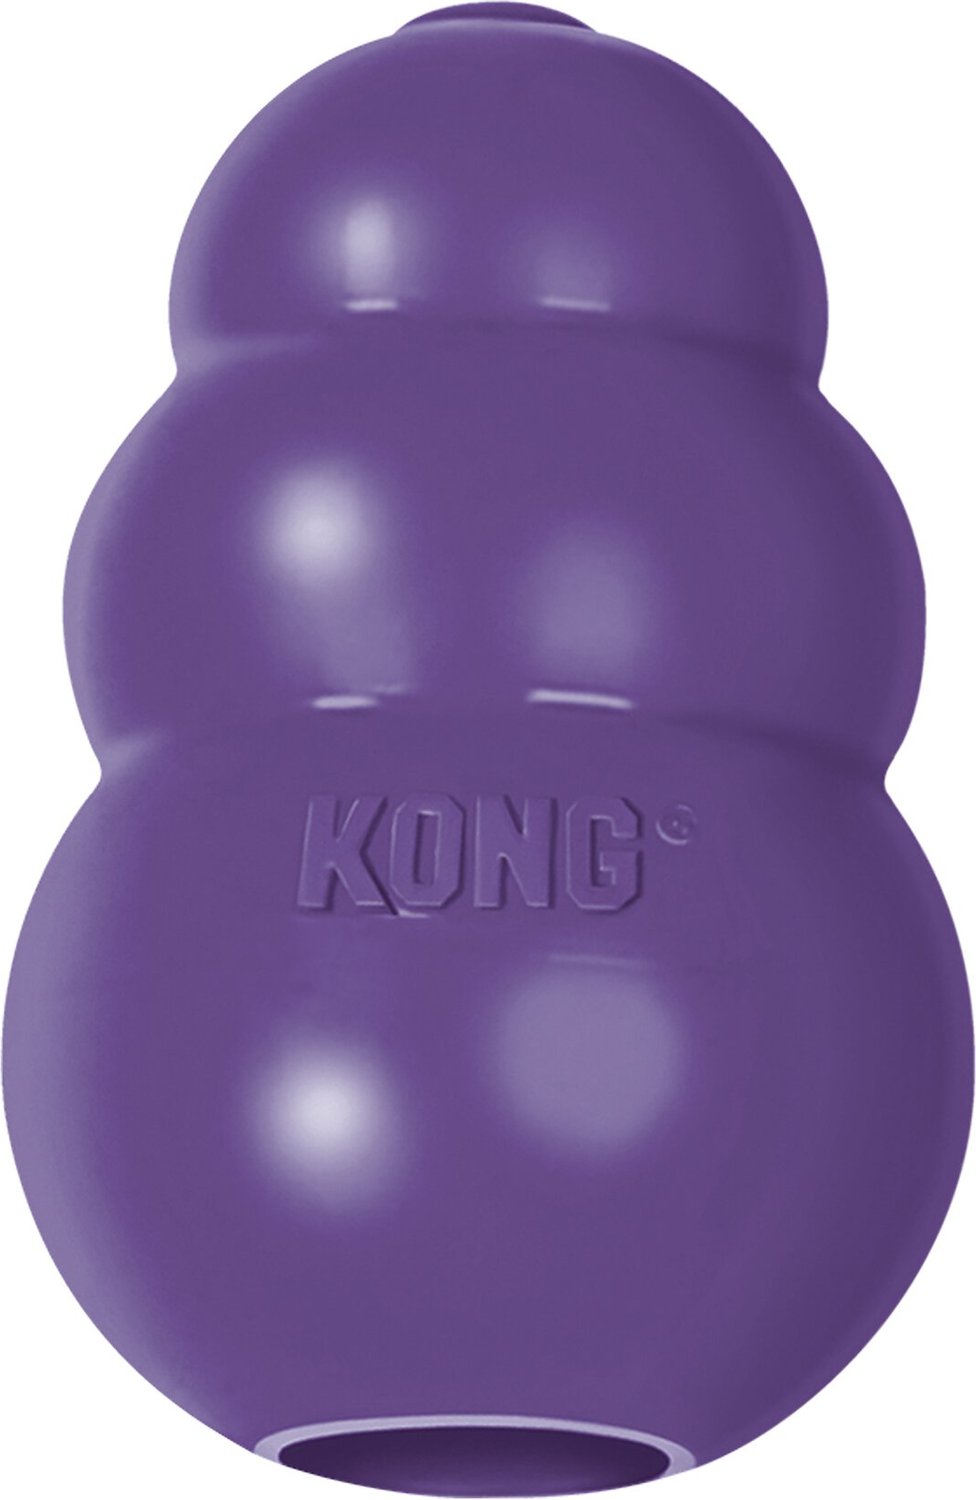 kong rubber dog toys